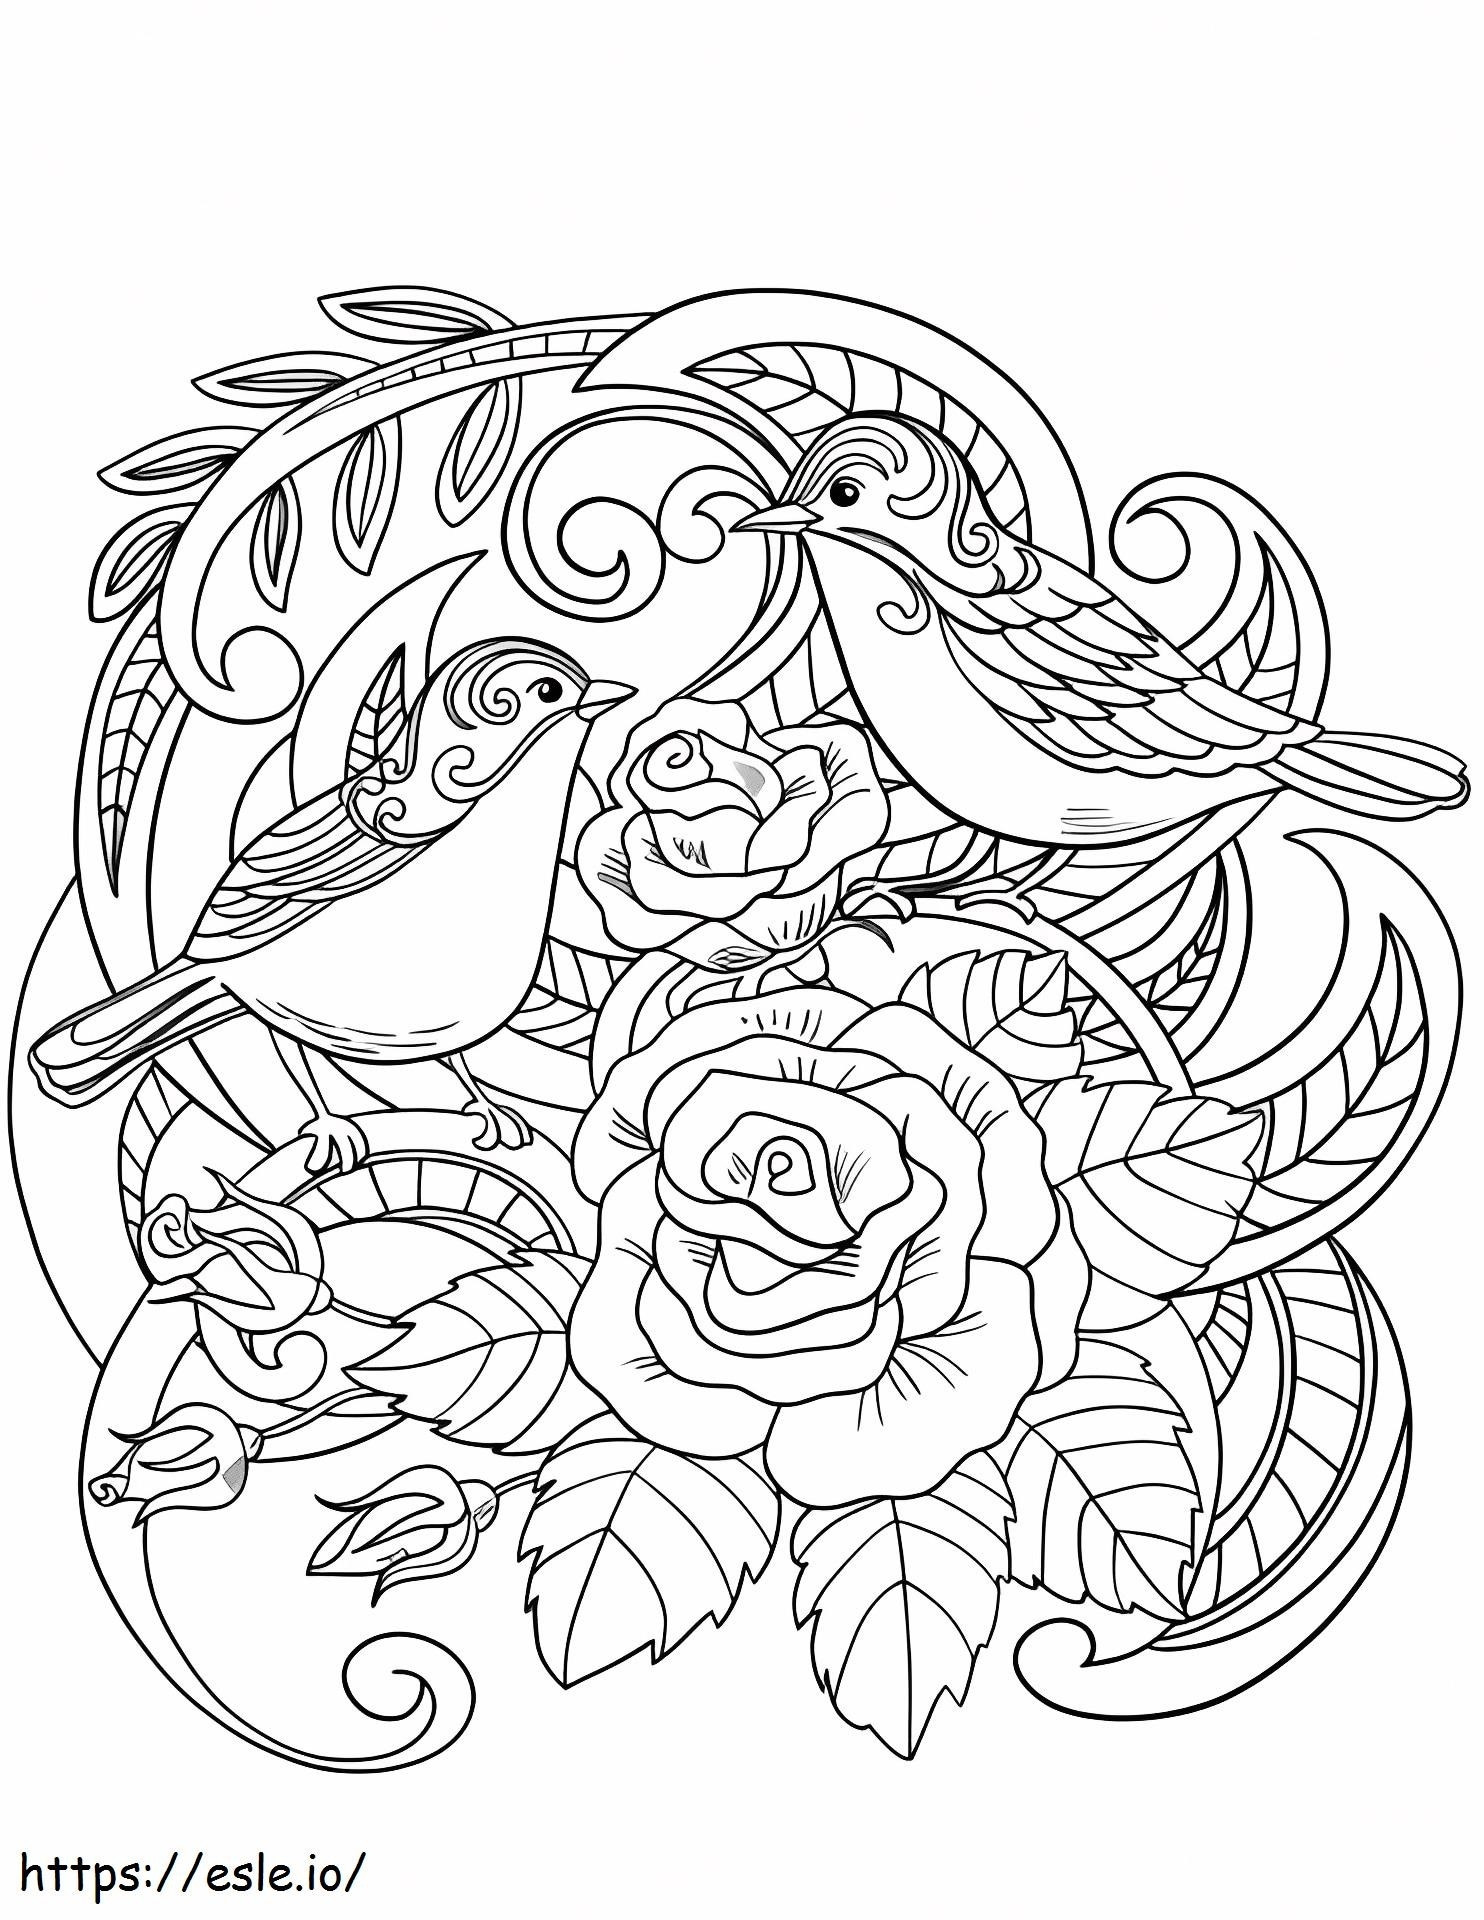 1530149557 House Sparrow In Flowers1 coloring page